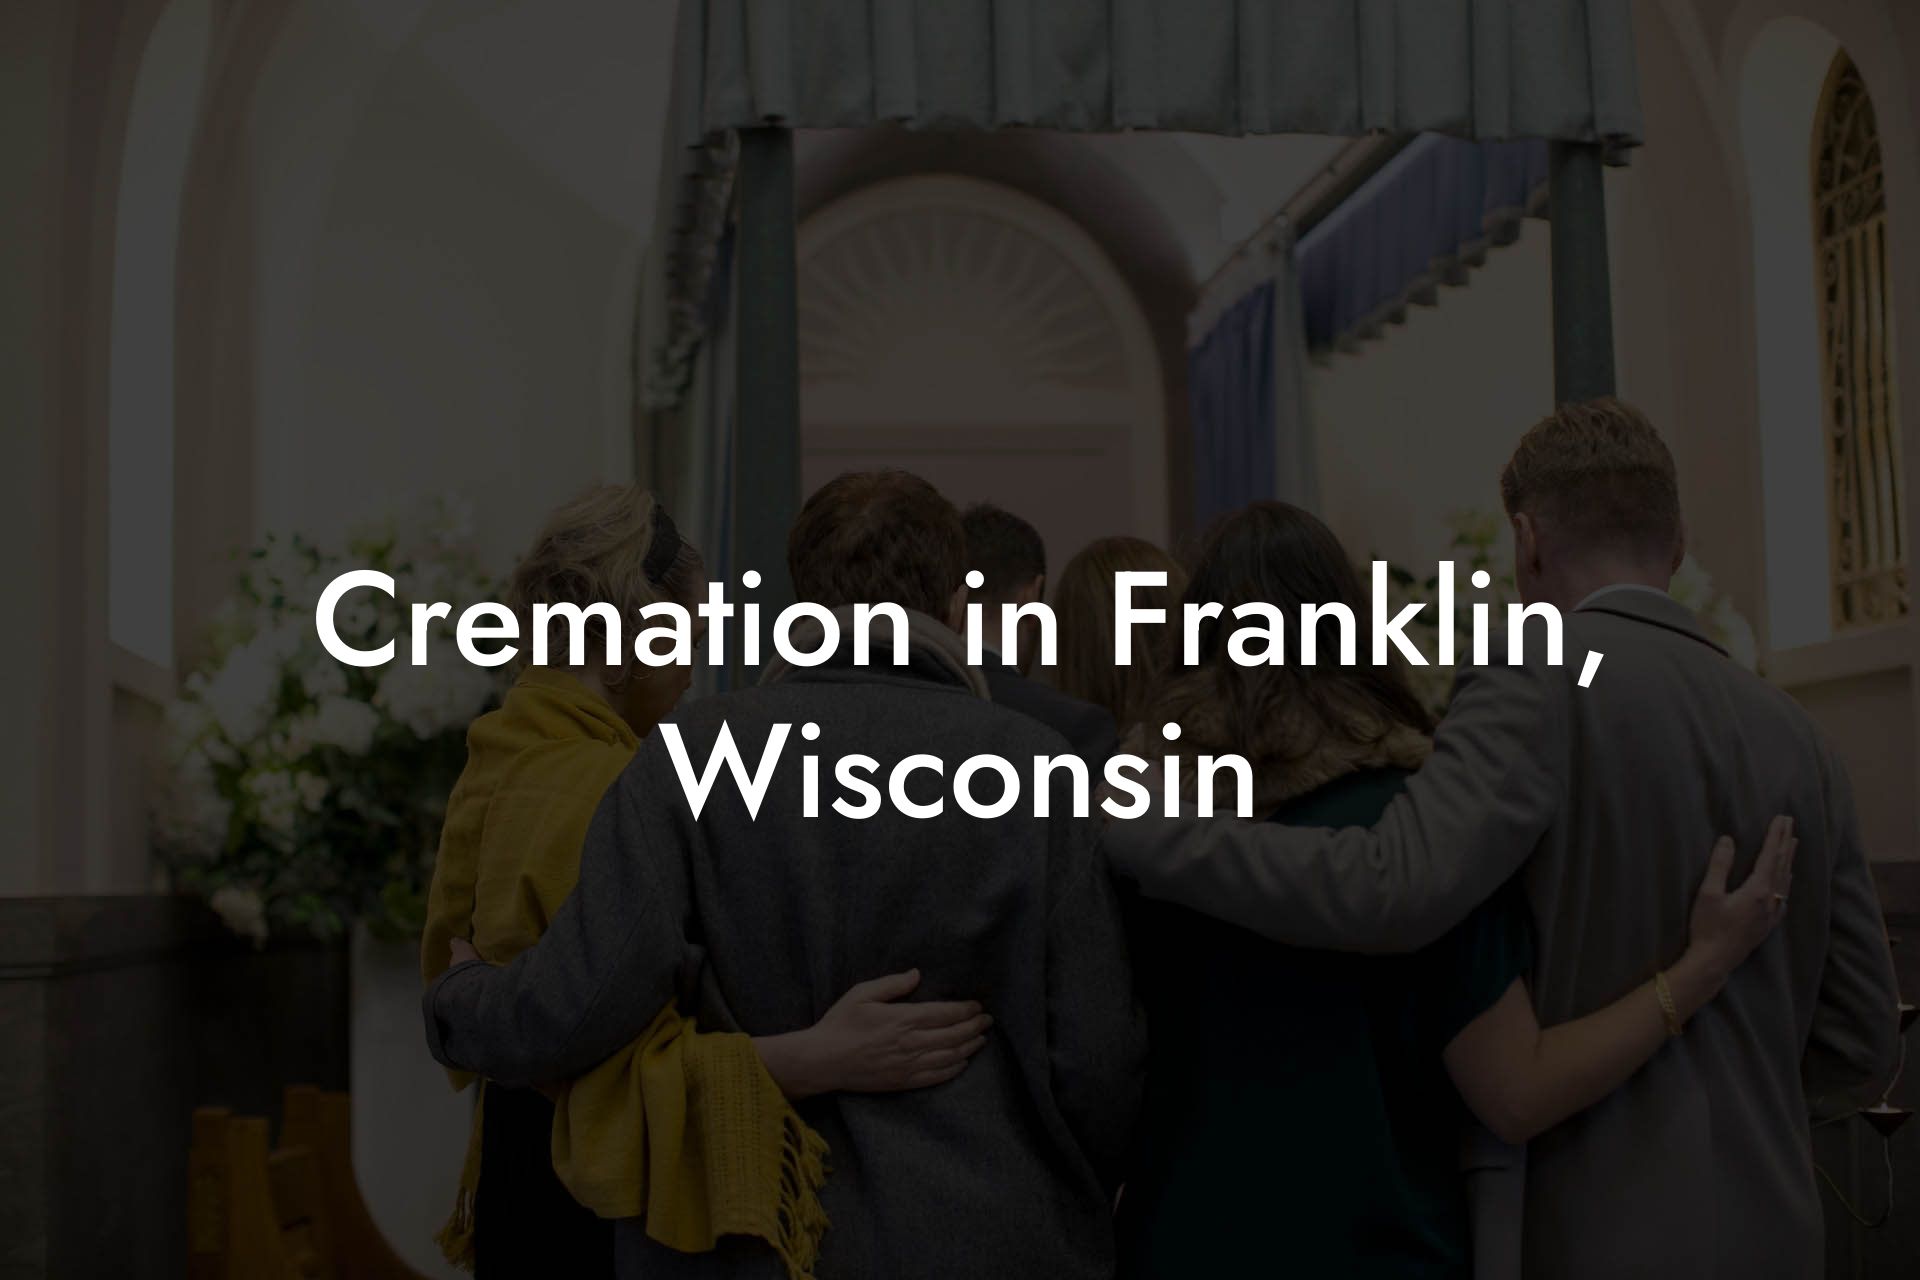 Cremation in Franklin, Wisconsin